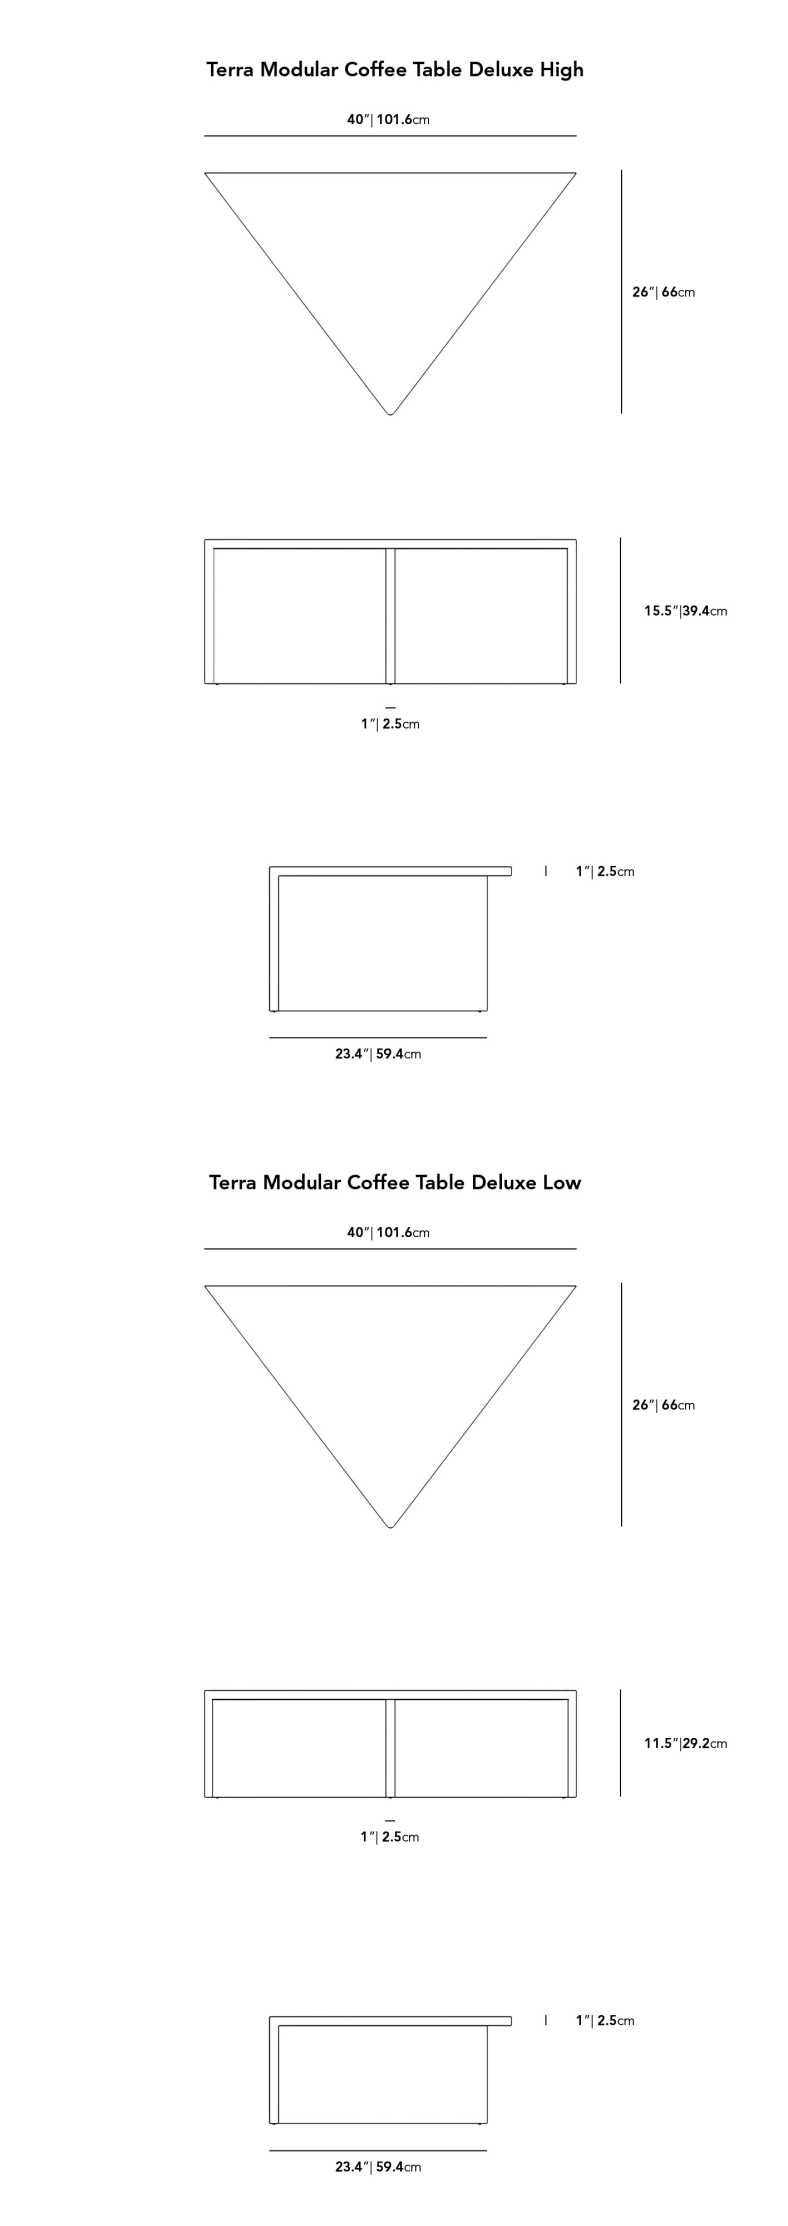 Dimensions for Terra Coffee Table - Low (Black Label)